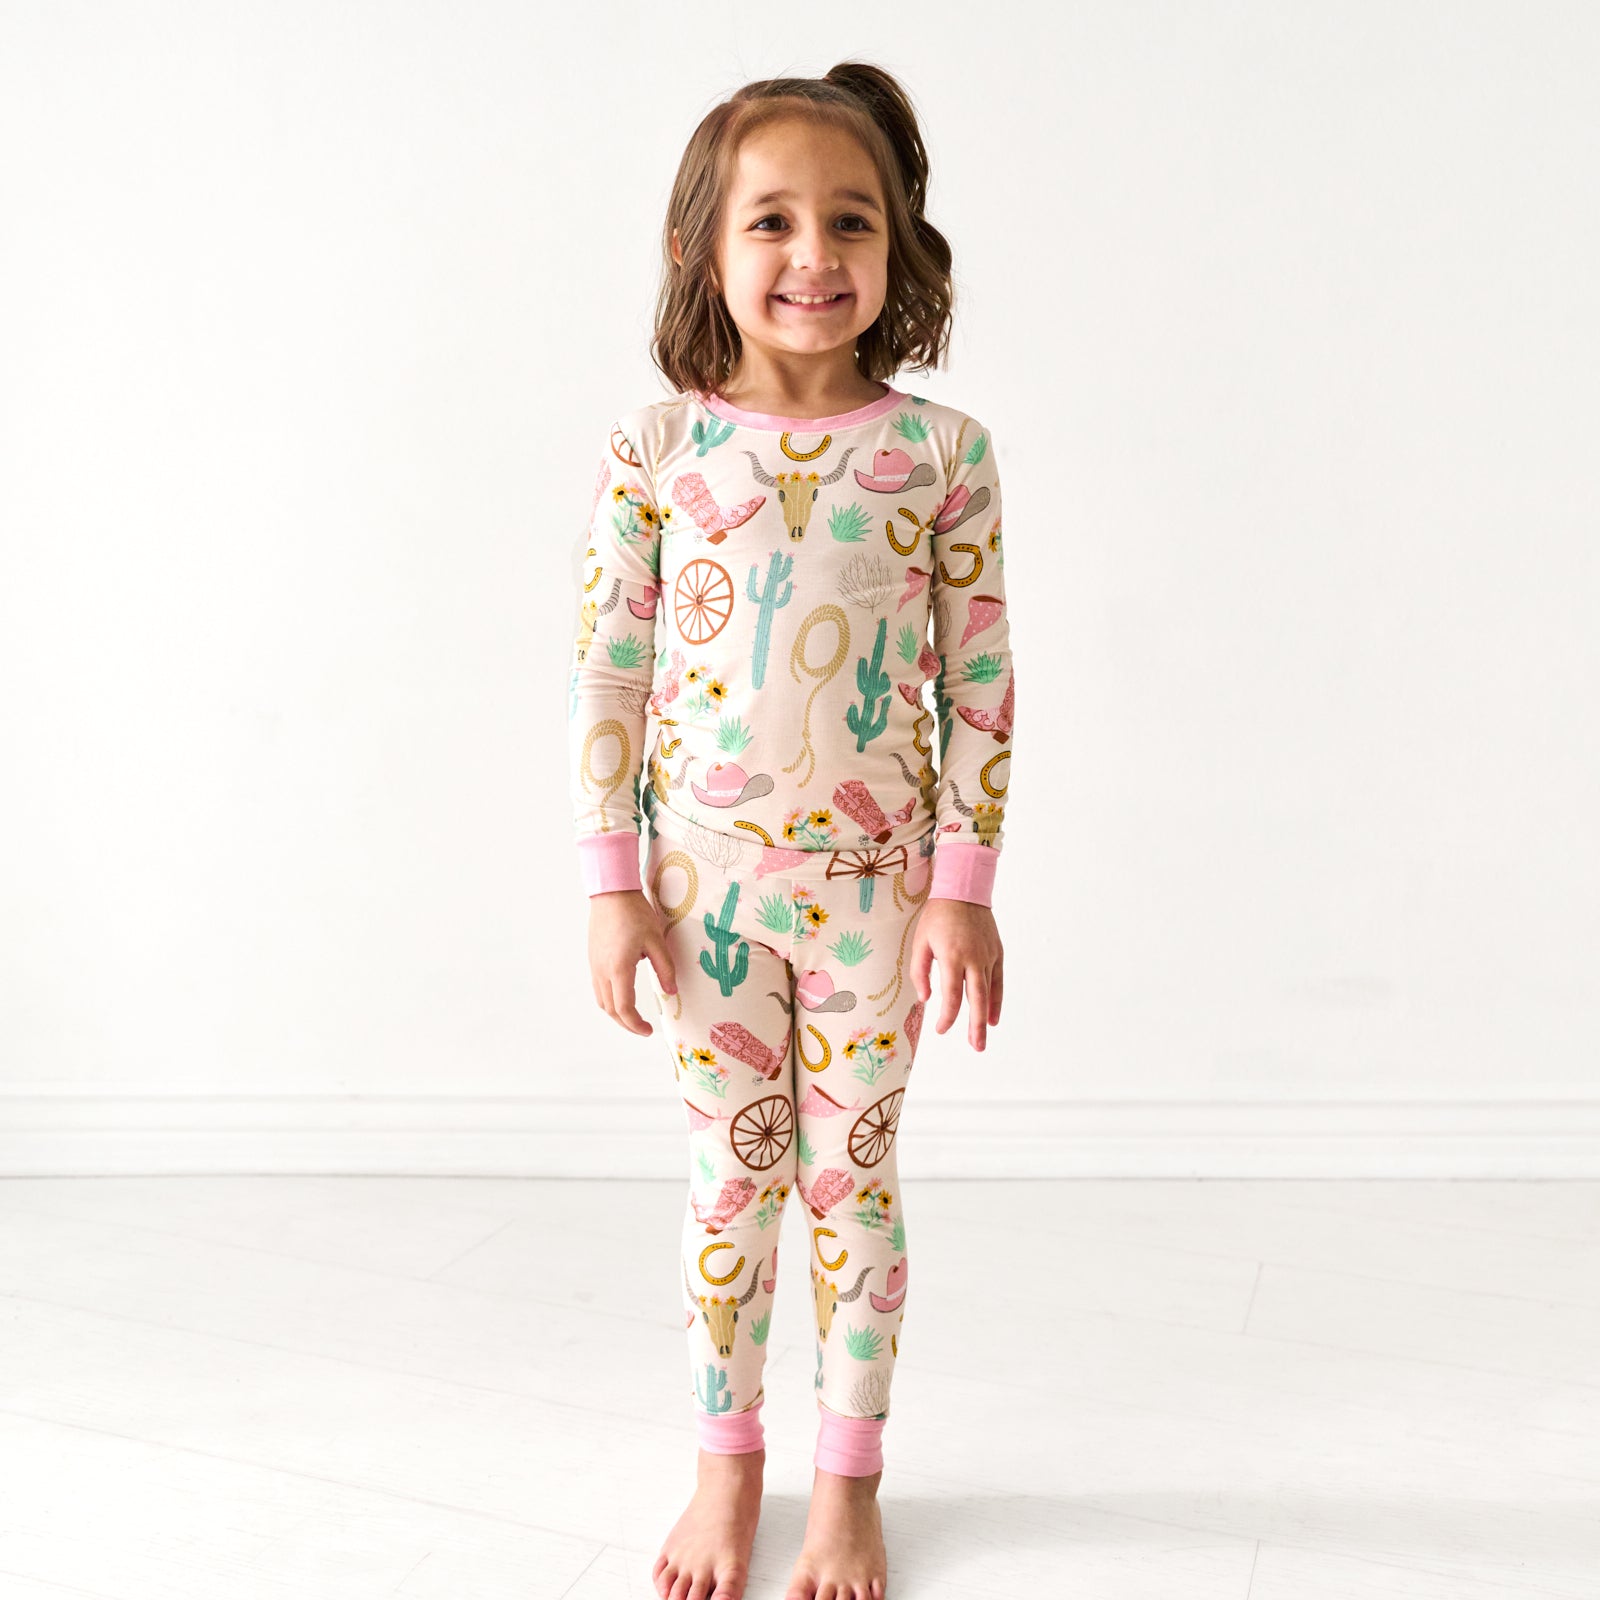 Child wearing a Pink Ready to Rodeo two piece pajama set